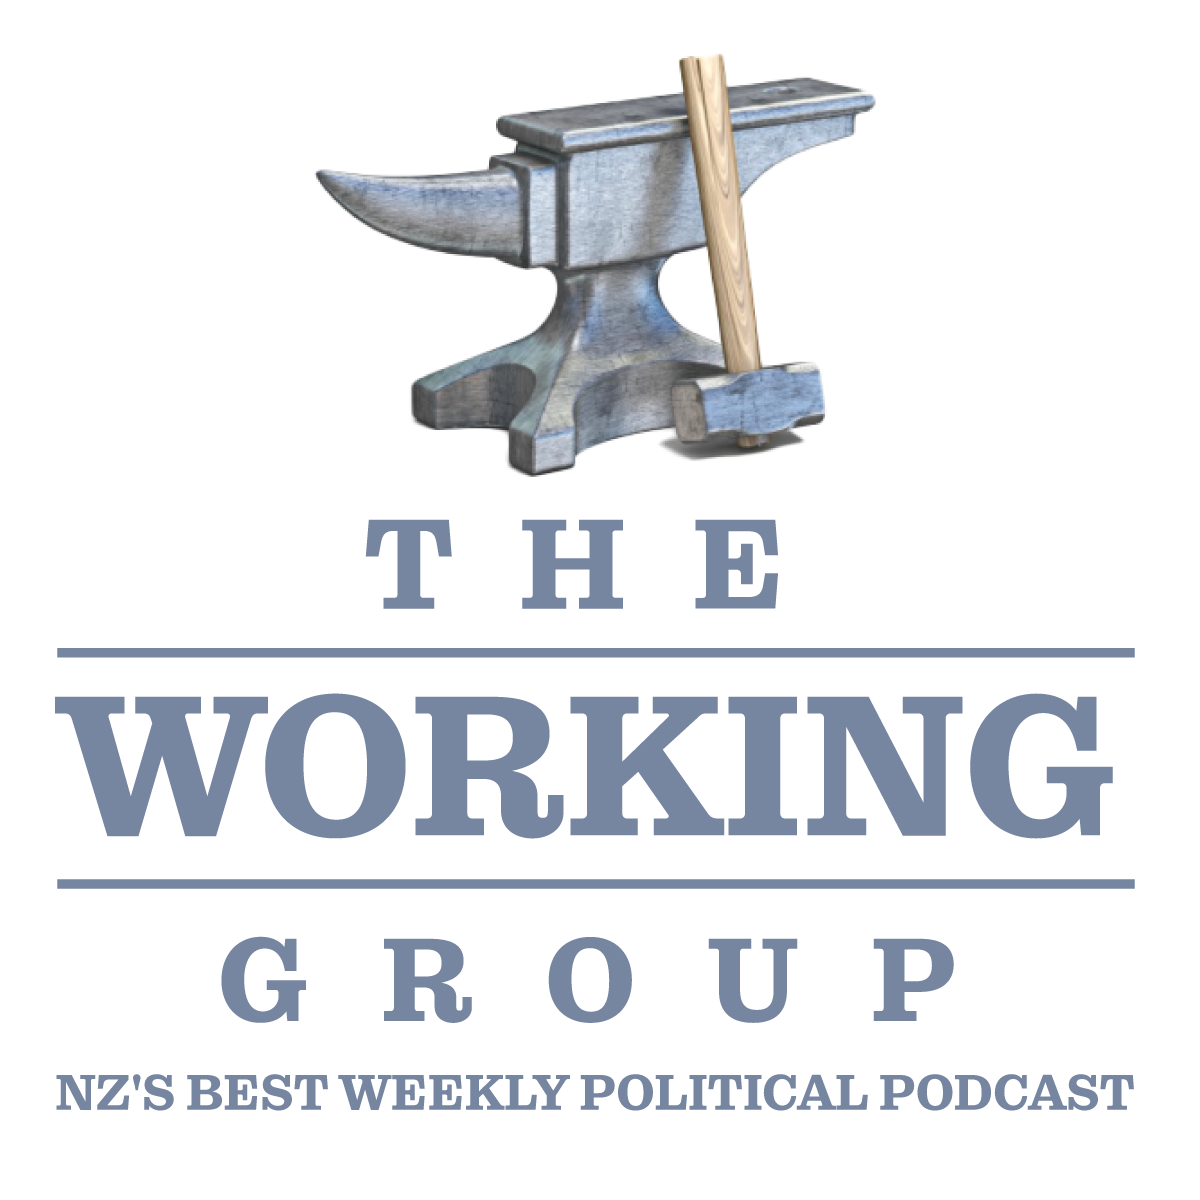 The Working Group with Matthew Hooton, Dr Oliver Hartwich and Damien Grant